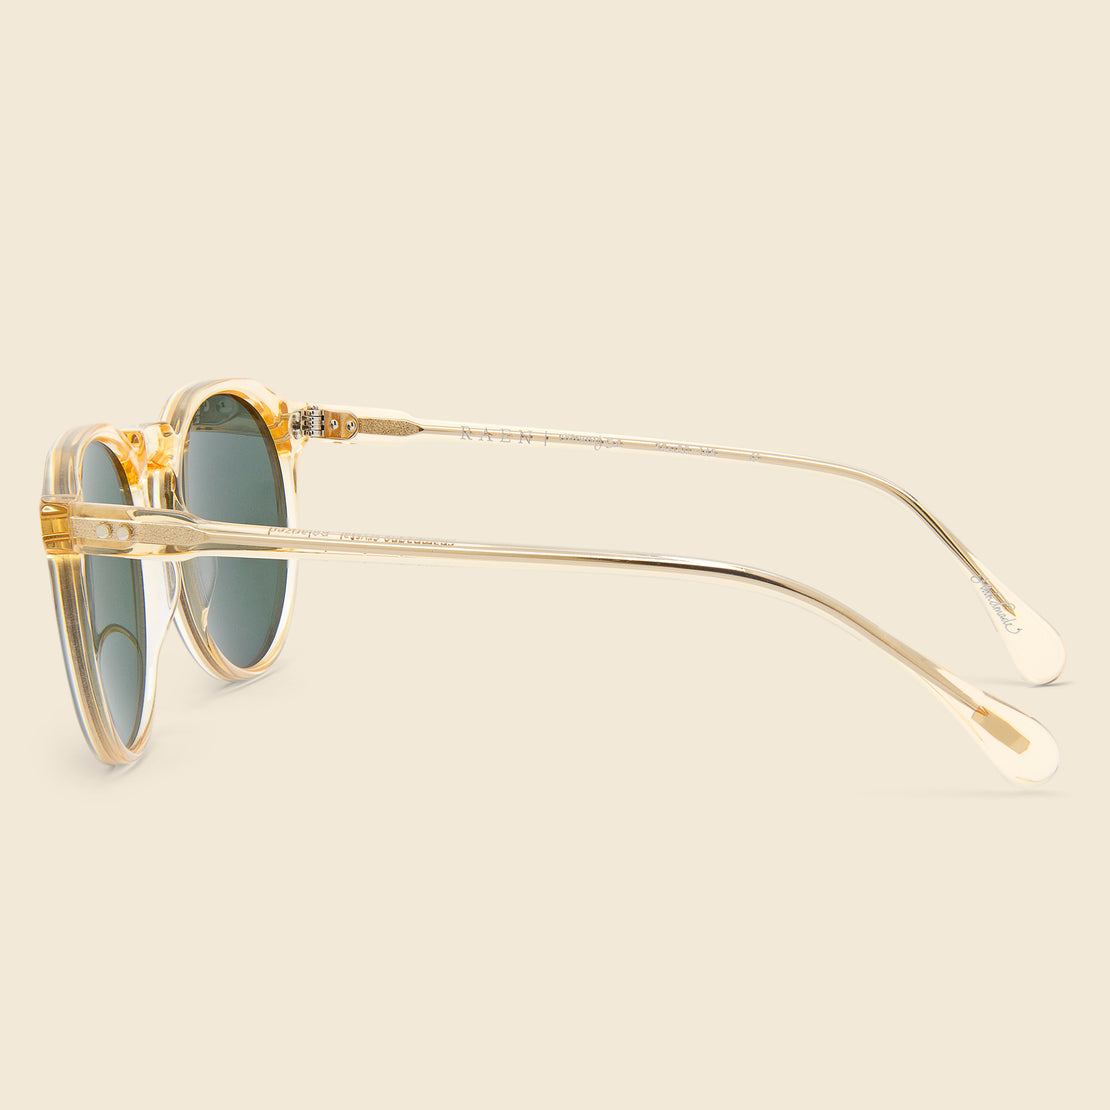 Remmy Sunglasses - Champagne Crystal/Green - Raen - STAG Provisions - W - Accessories - Eyewear